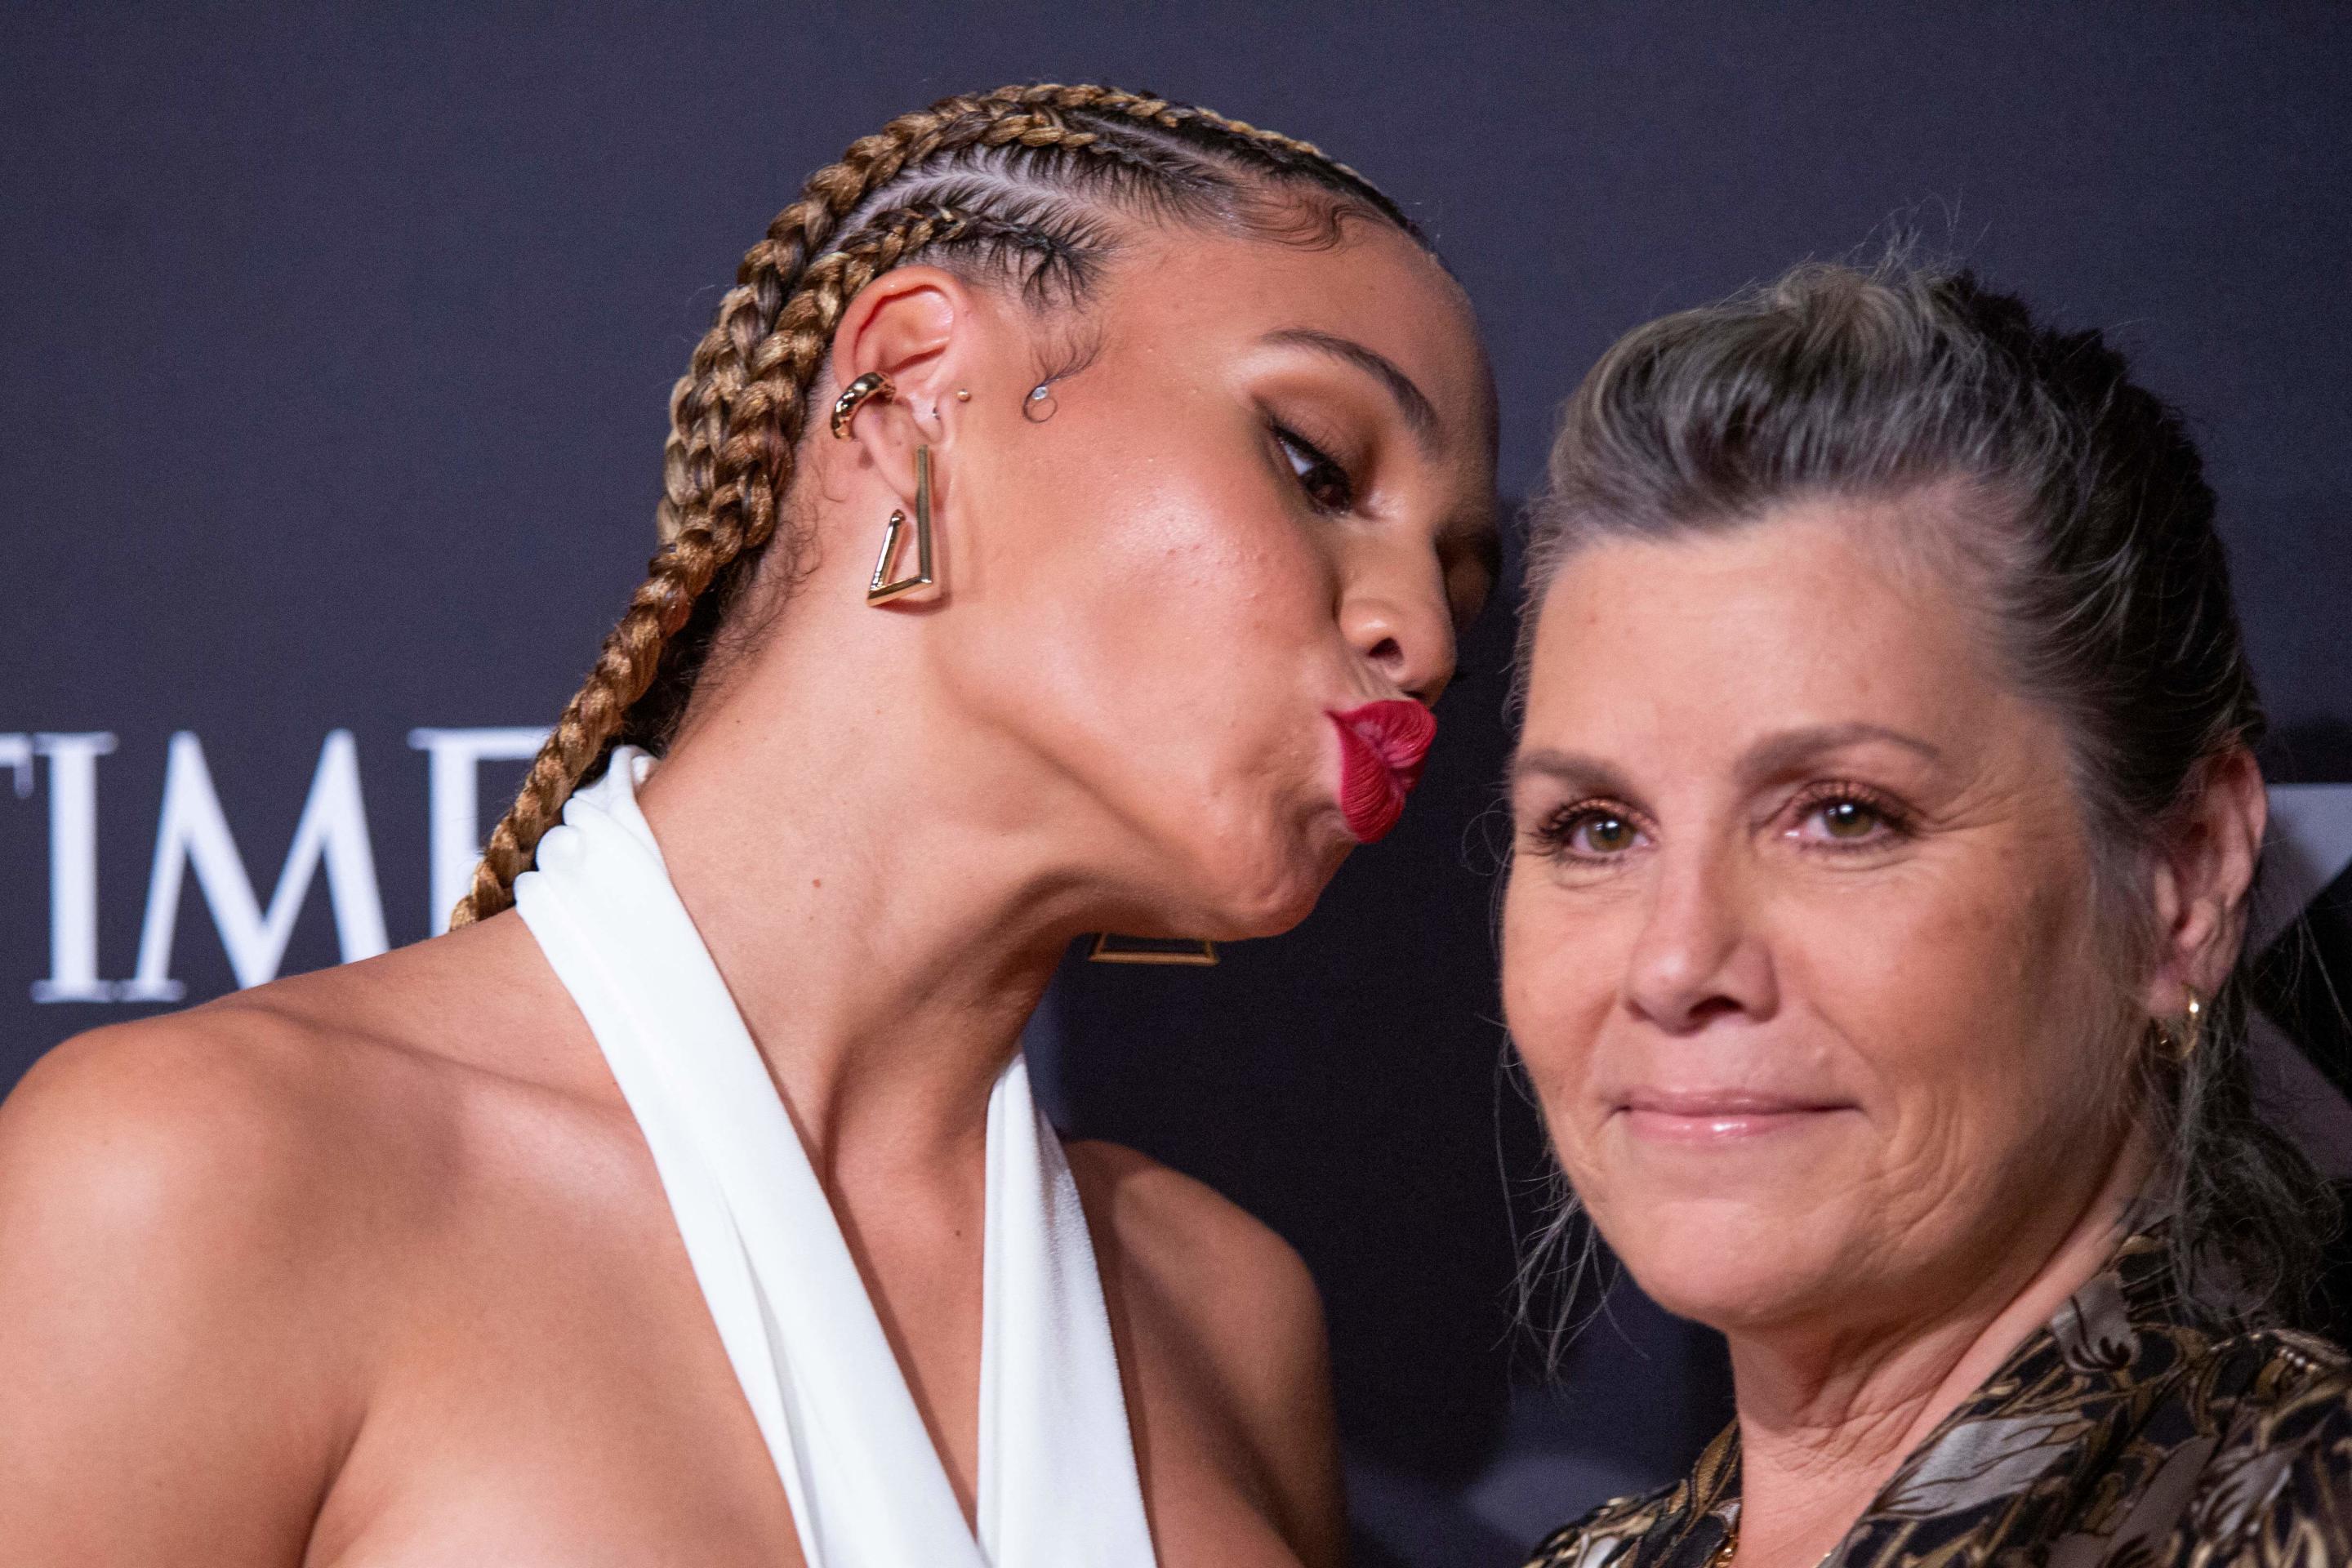 US soccer player Trinity Rodman (L) and her mother Michelle Moyer (R) attend Time 100 Next gala in New York, October 25, 2022. (Photo by KENA BETANCUR / AFP) (Photo by KENA BETANCUR/AFP via Getty Images)